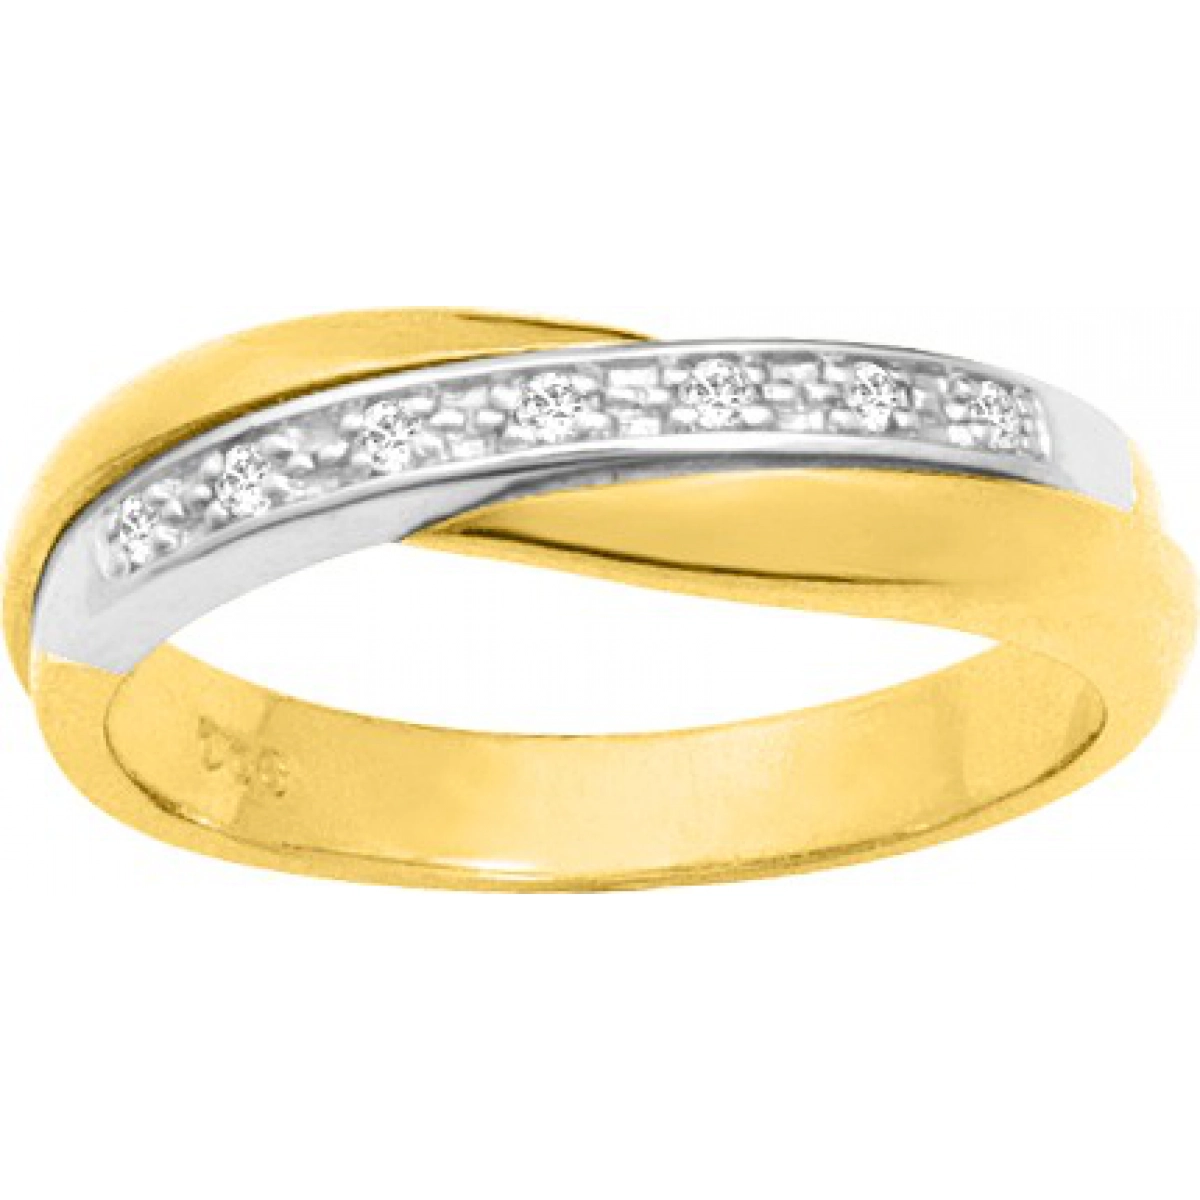 All.Croisée di 0.06ct or375jb Lua Blanca  07095HV - Taille 52